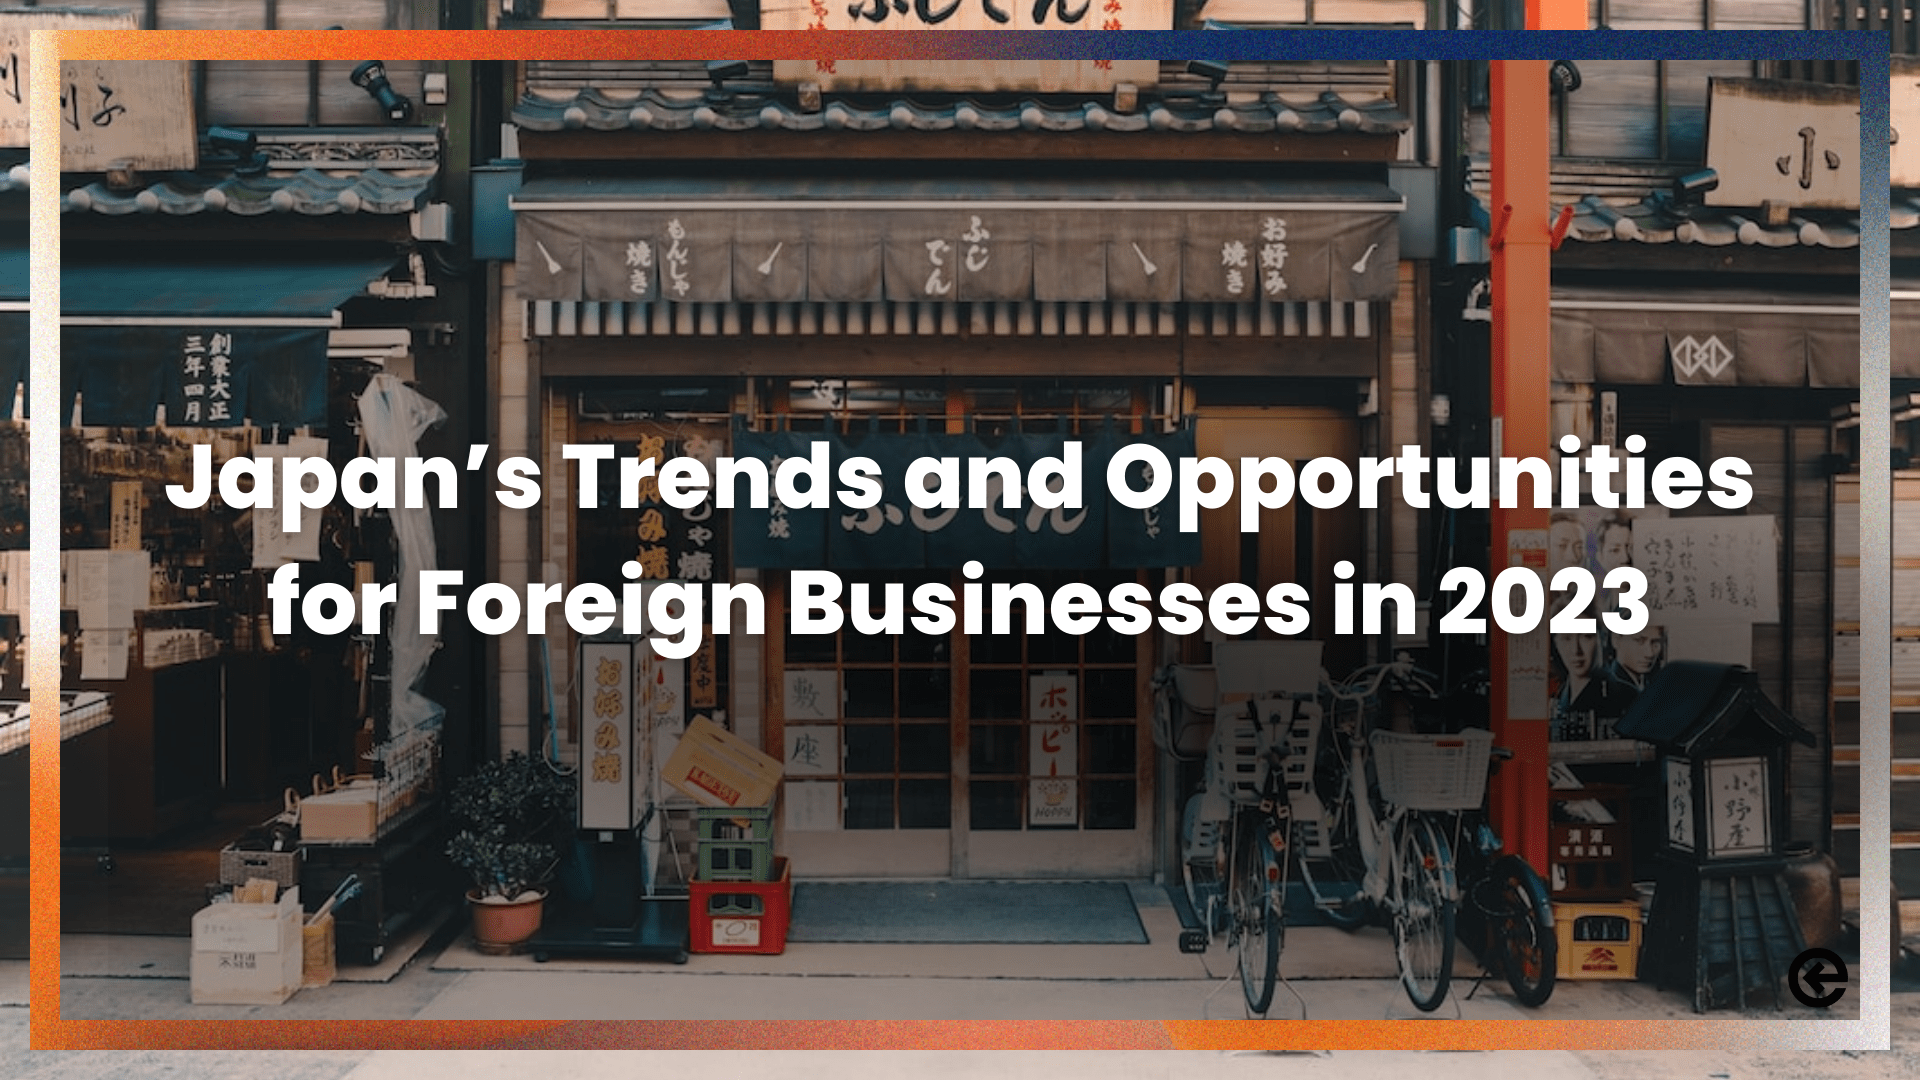 What Are Japan’s Trends and Opportunities for Foreign Businesses in 2023?